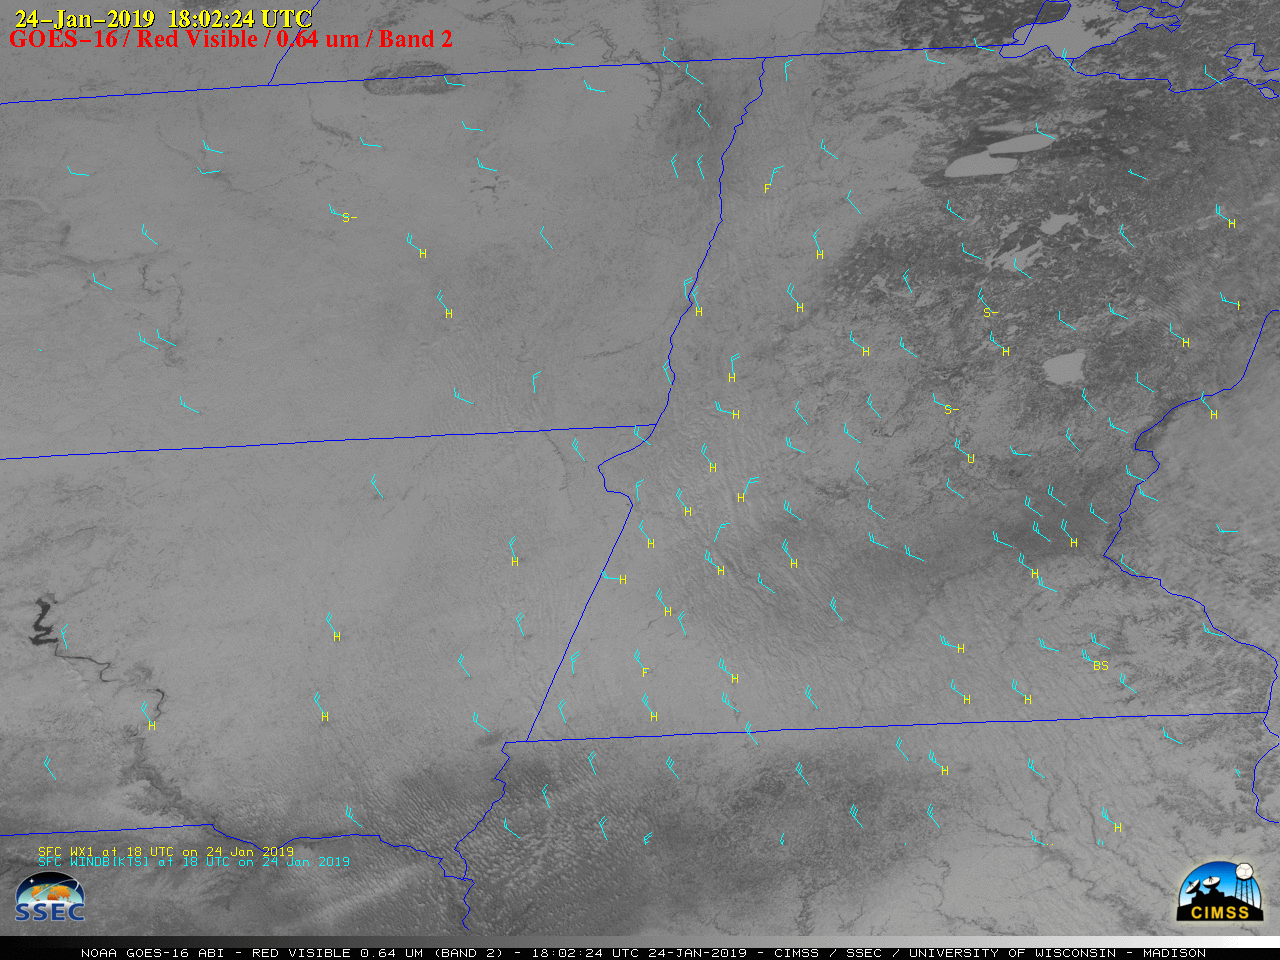 GOES-16 "Red" Visible (0.64 µm) images, with hourly plots of surface wind barbs and weather type [click to play MP4 animation]